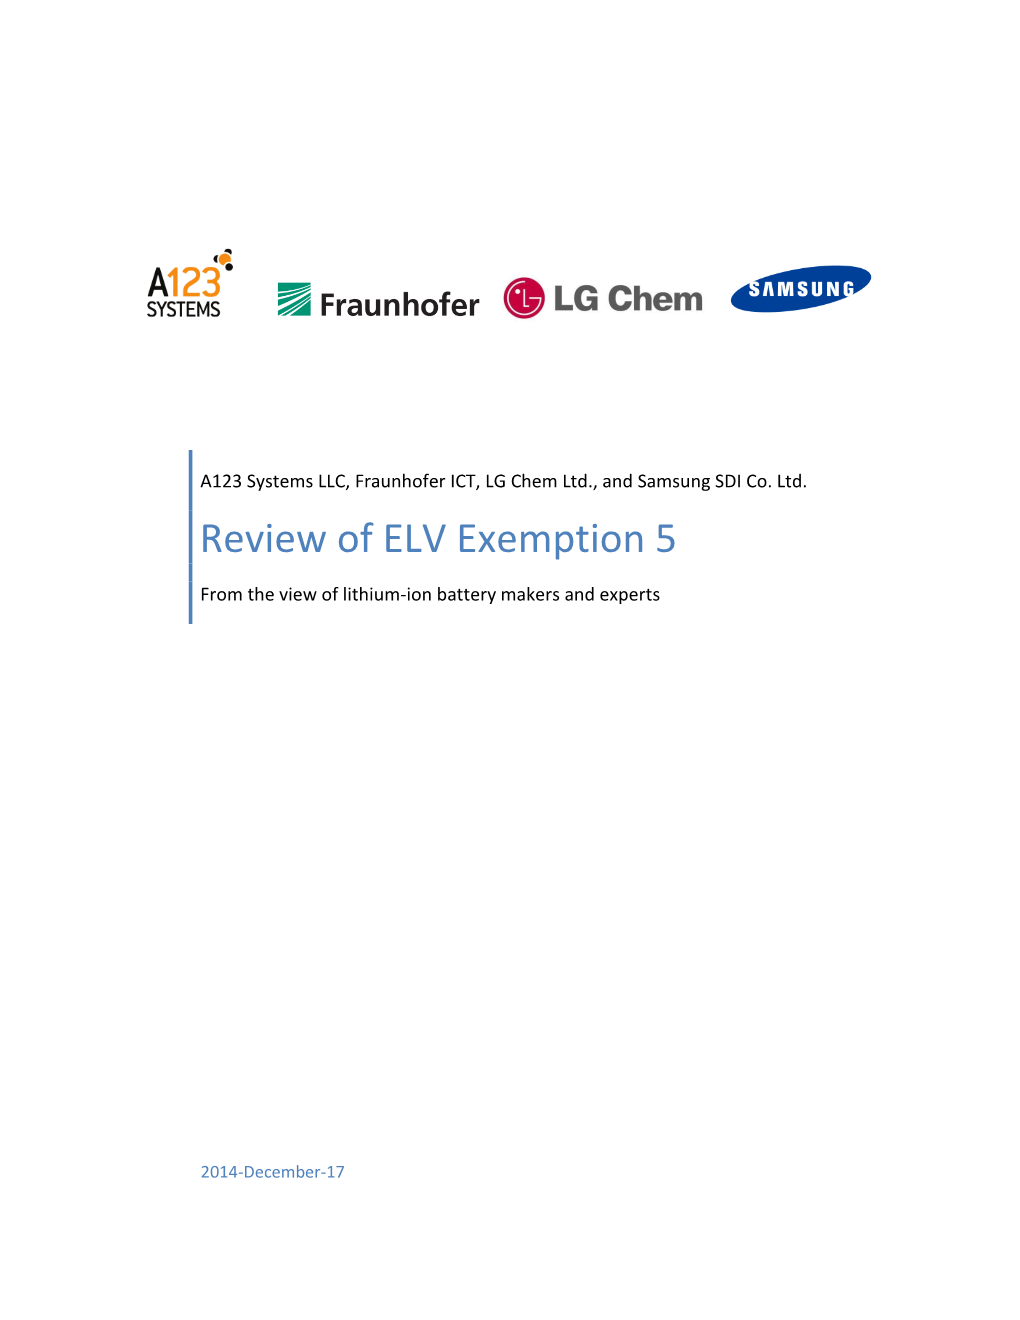 Review of ELV Exemption 5 from the View of Lithium-Ion Battery Makers and Experts